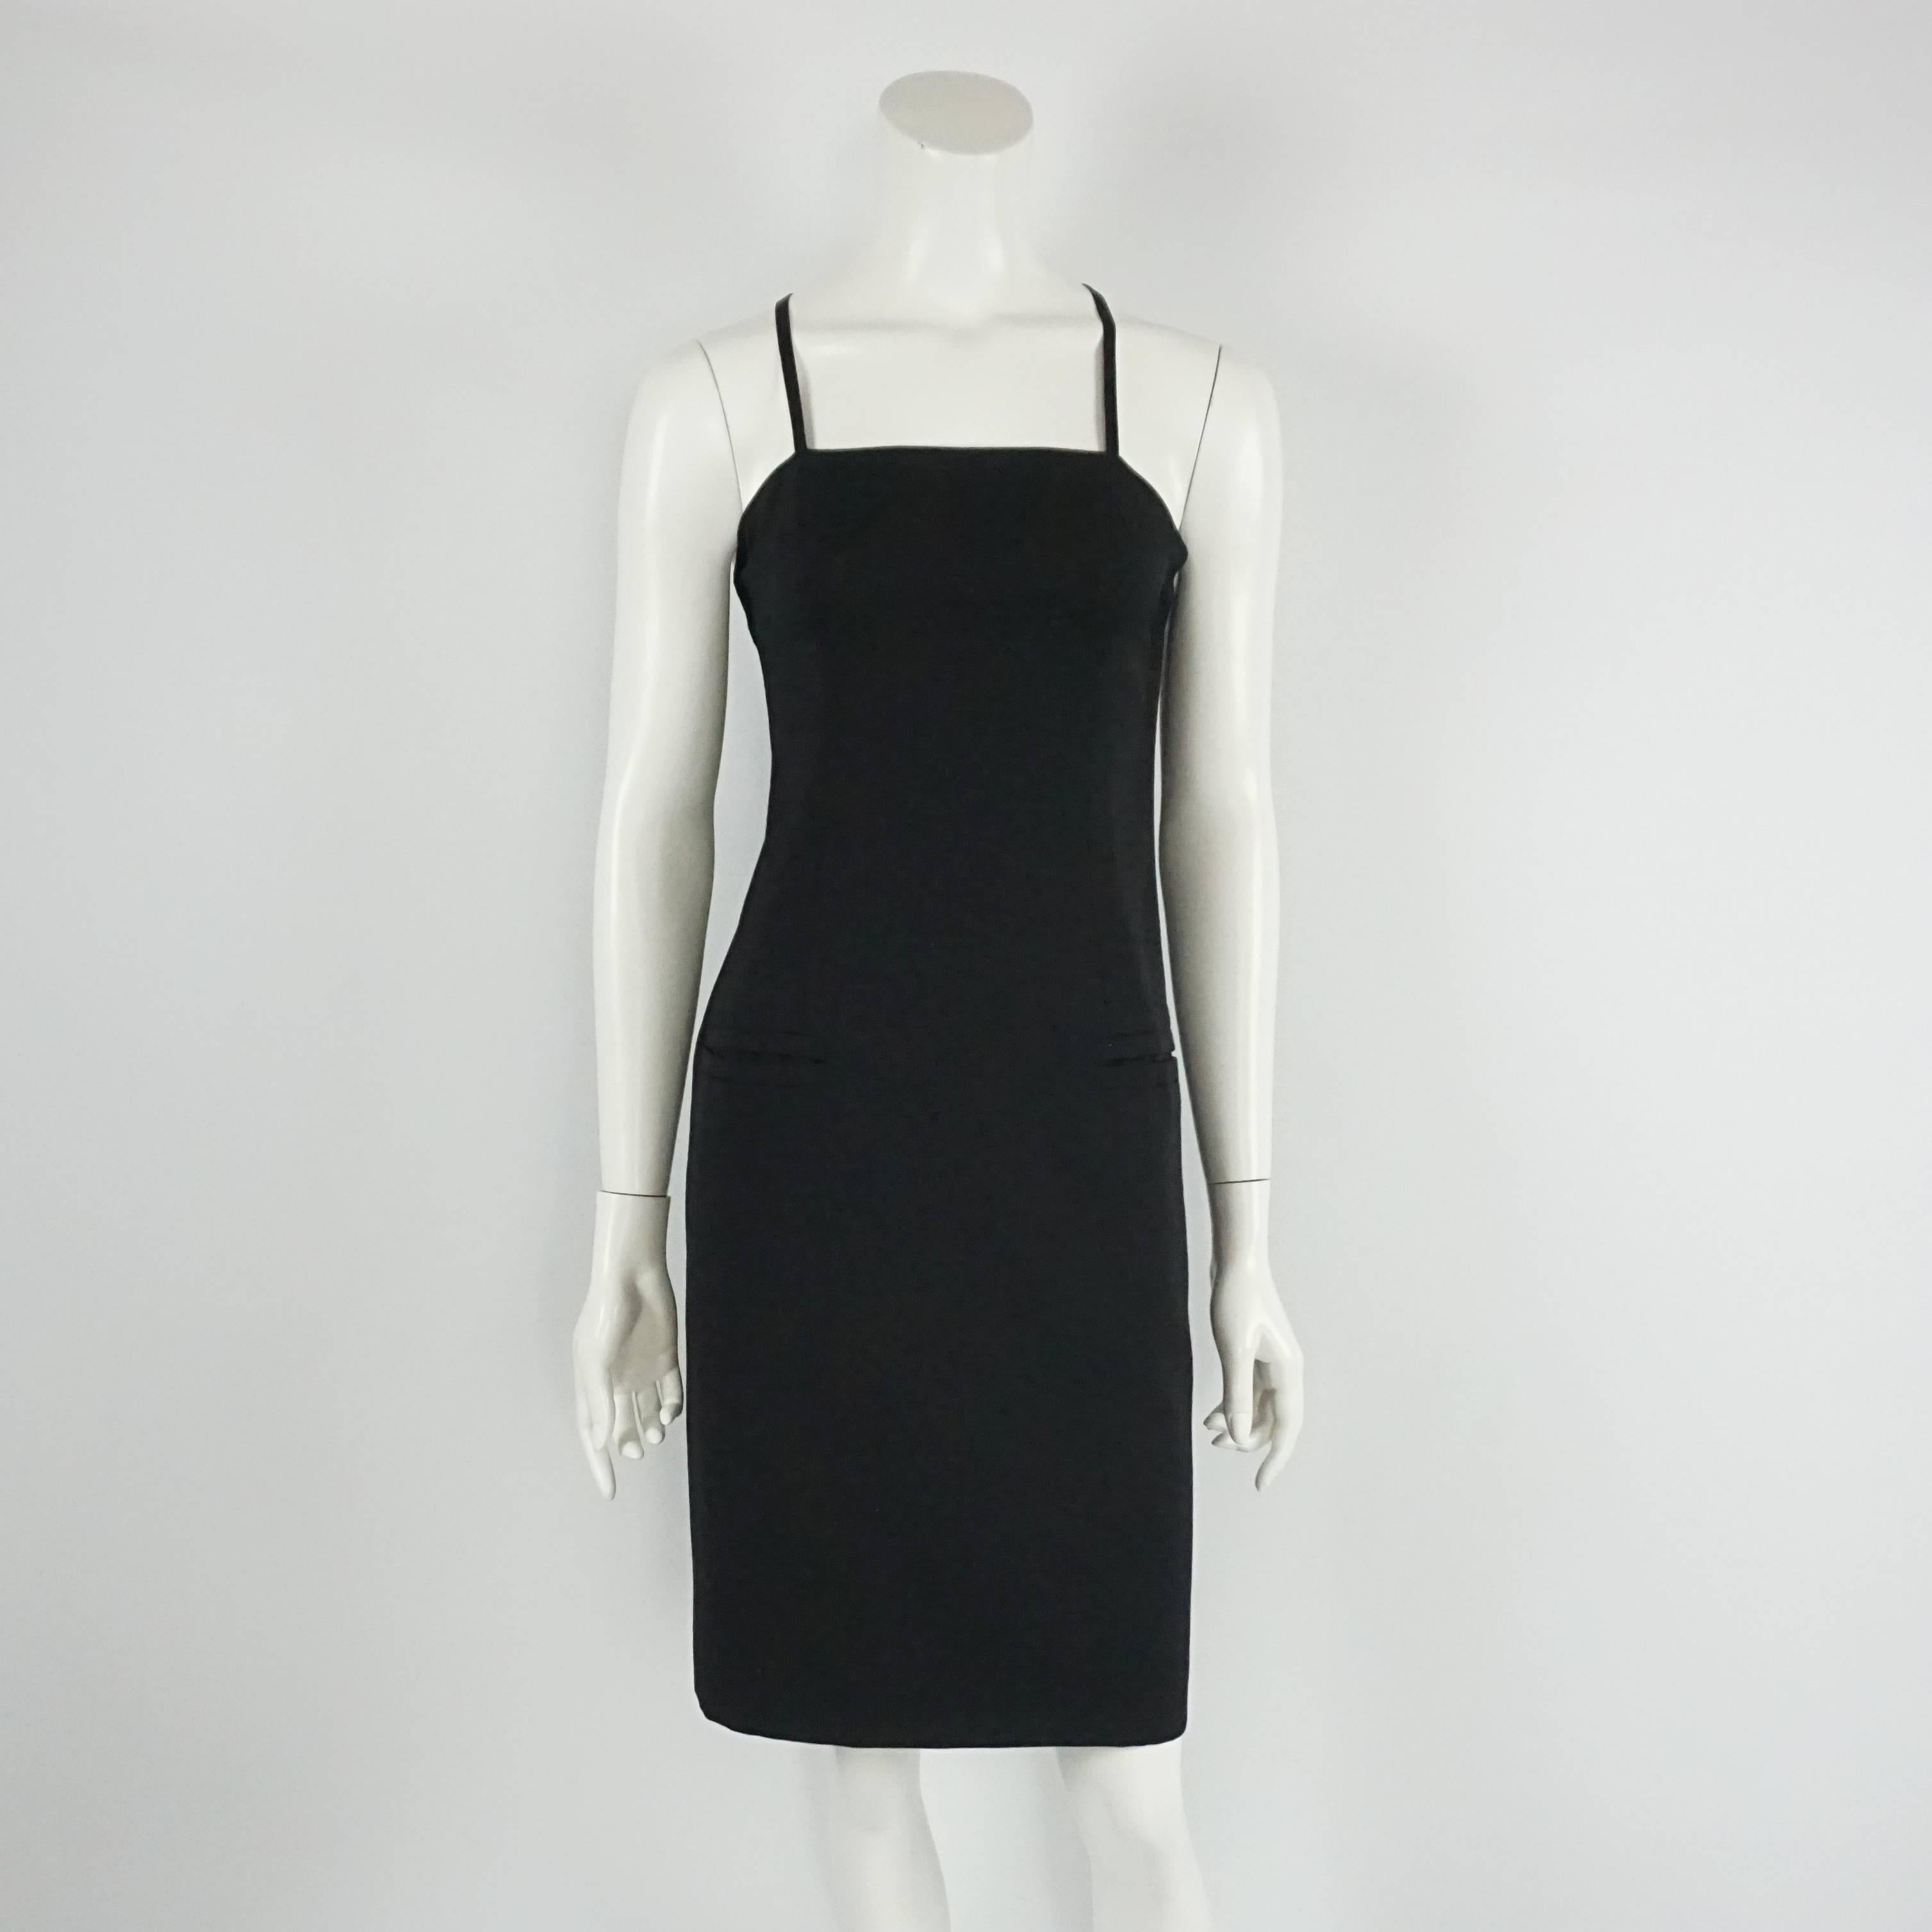 Yves Saint Laurent Black Dress with Bolero Jacket - 34 - Circa 90's  This very beautiful and elegant vintage YSL dress and jacket are in excellent condition. The dress is simple, fitted and with 2 thin straps that criss cross in the back. It has a